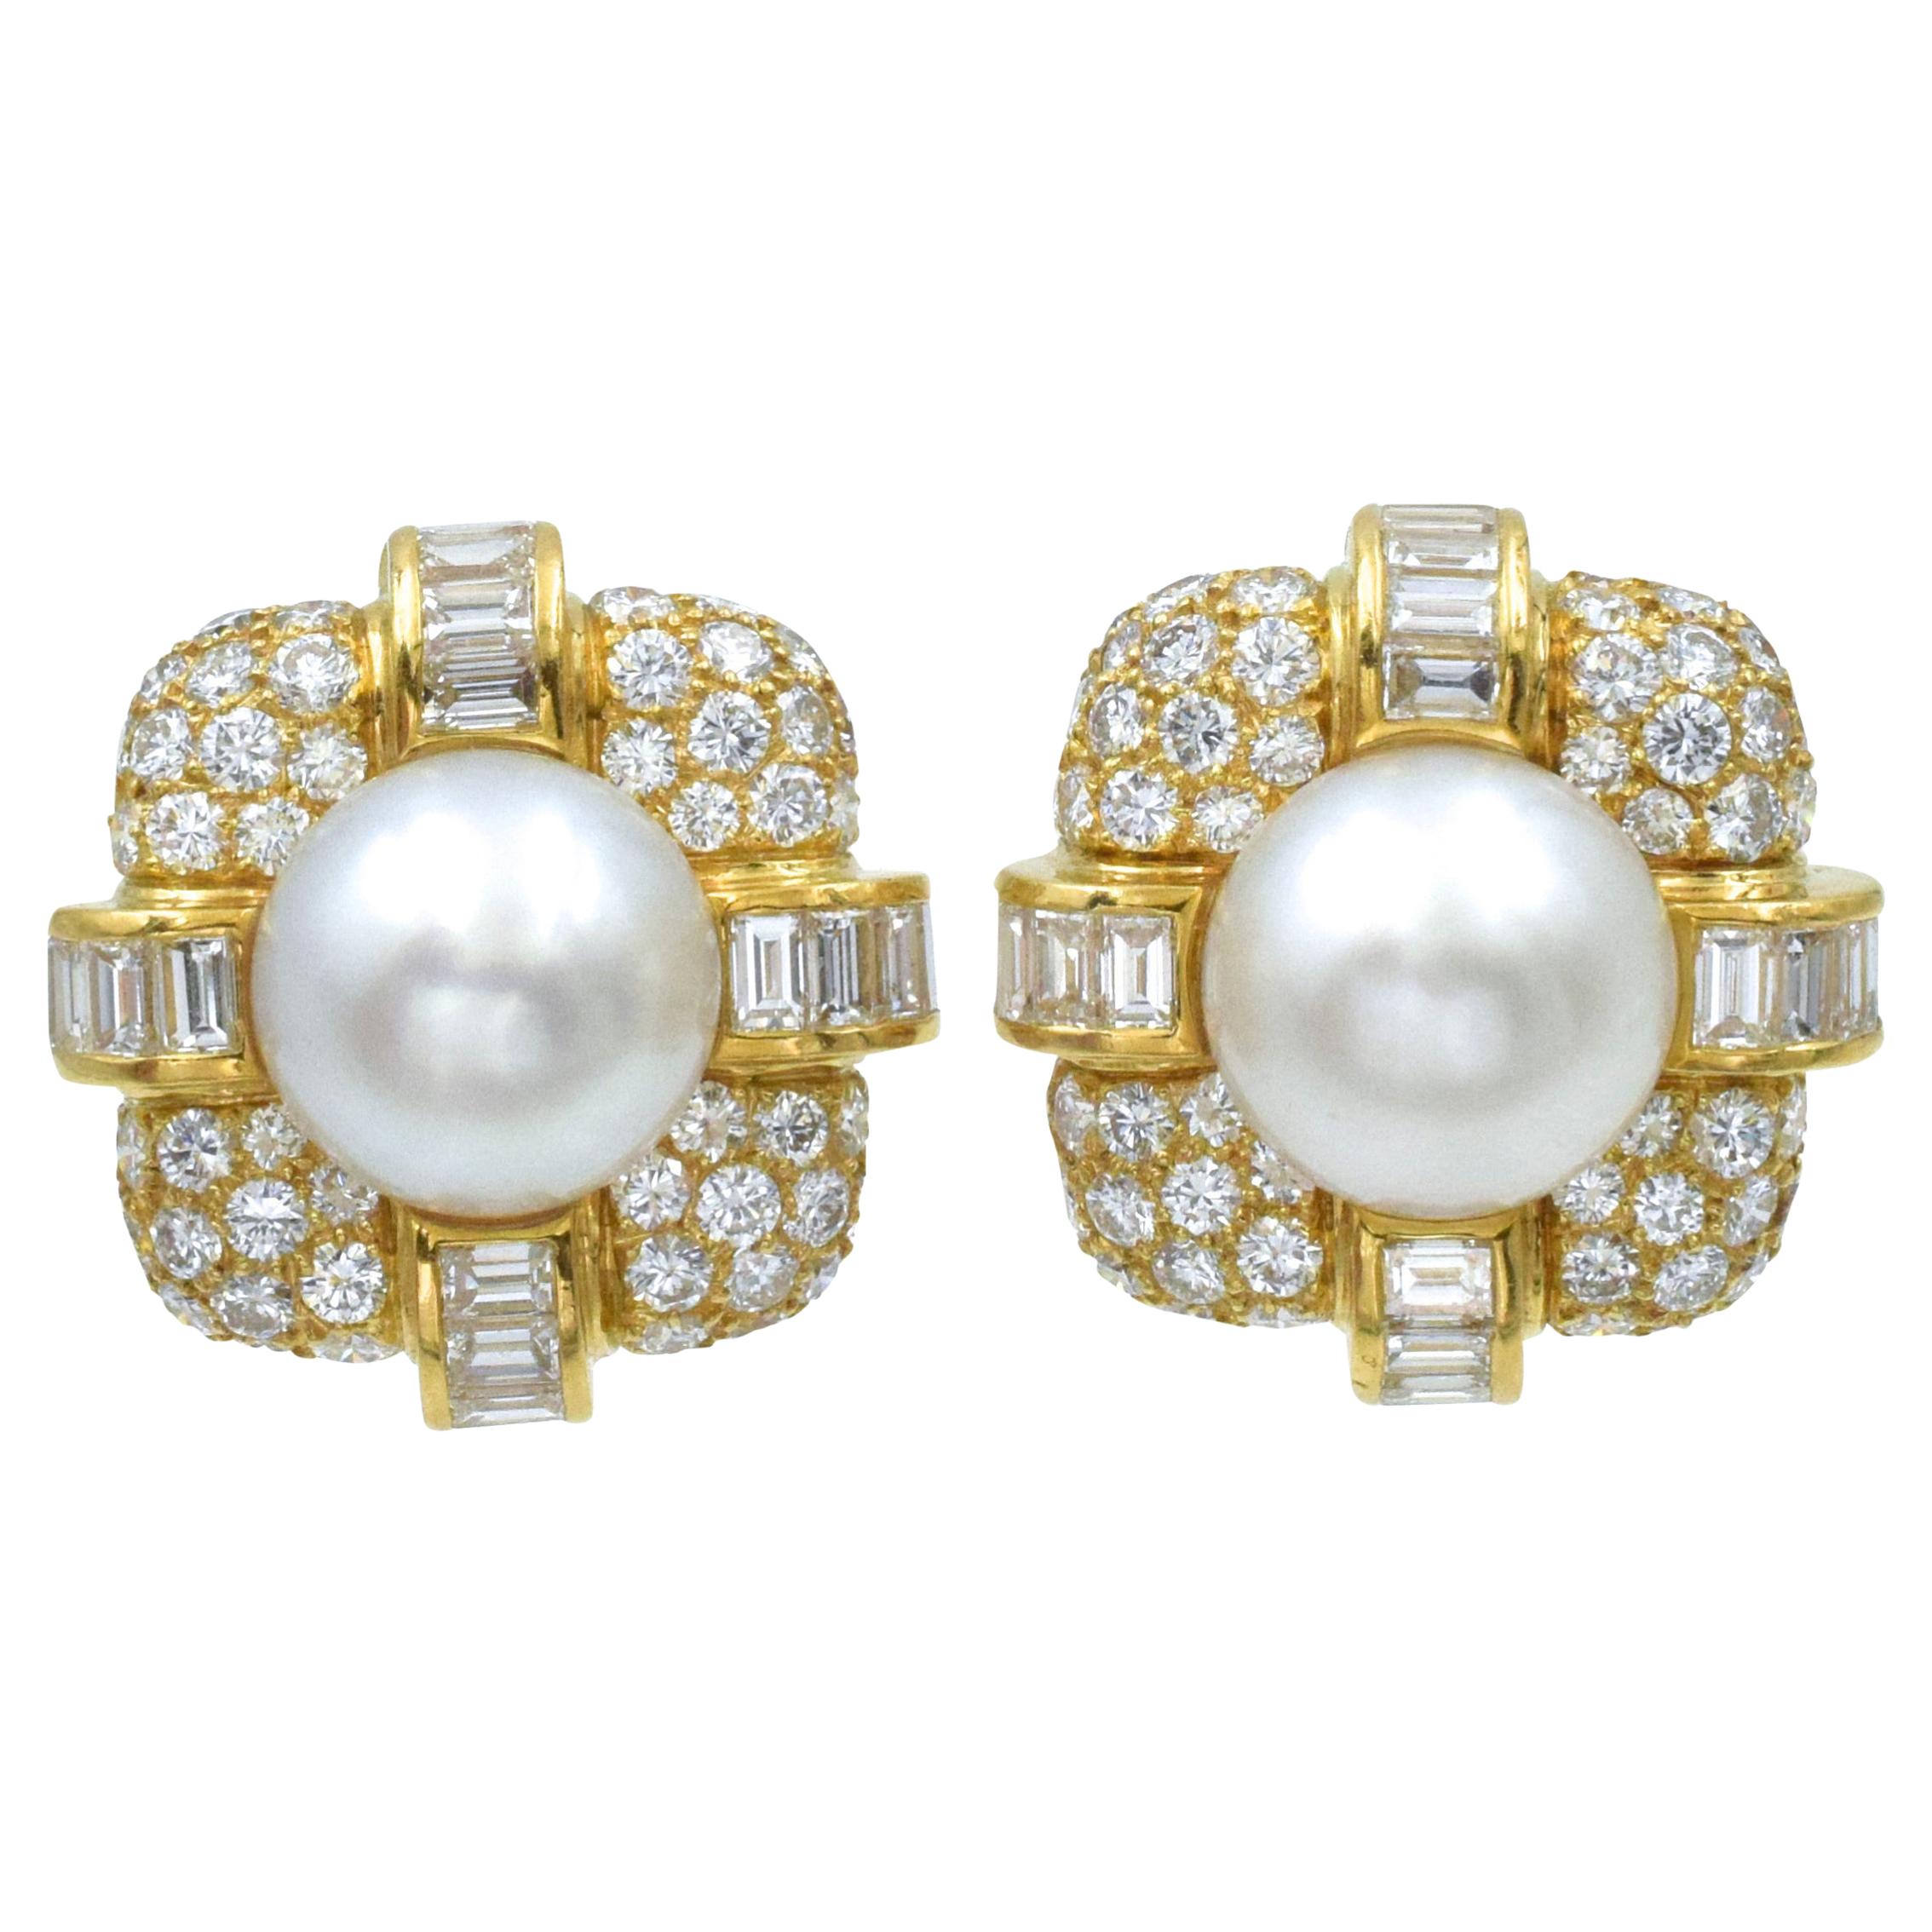 Van Cleef & Arpels South Sea Cultured Pearl and Diamond Ear-Clips